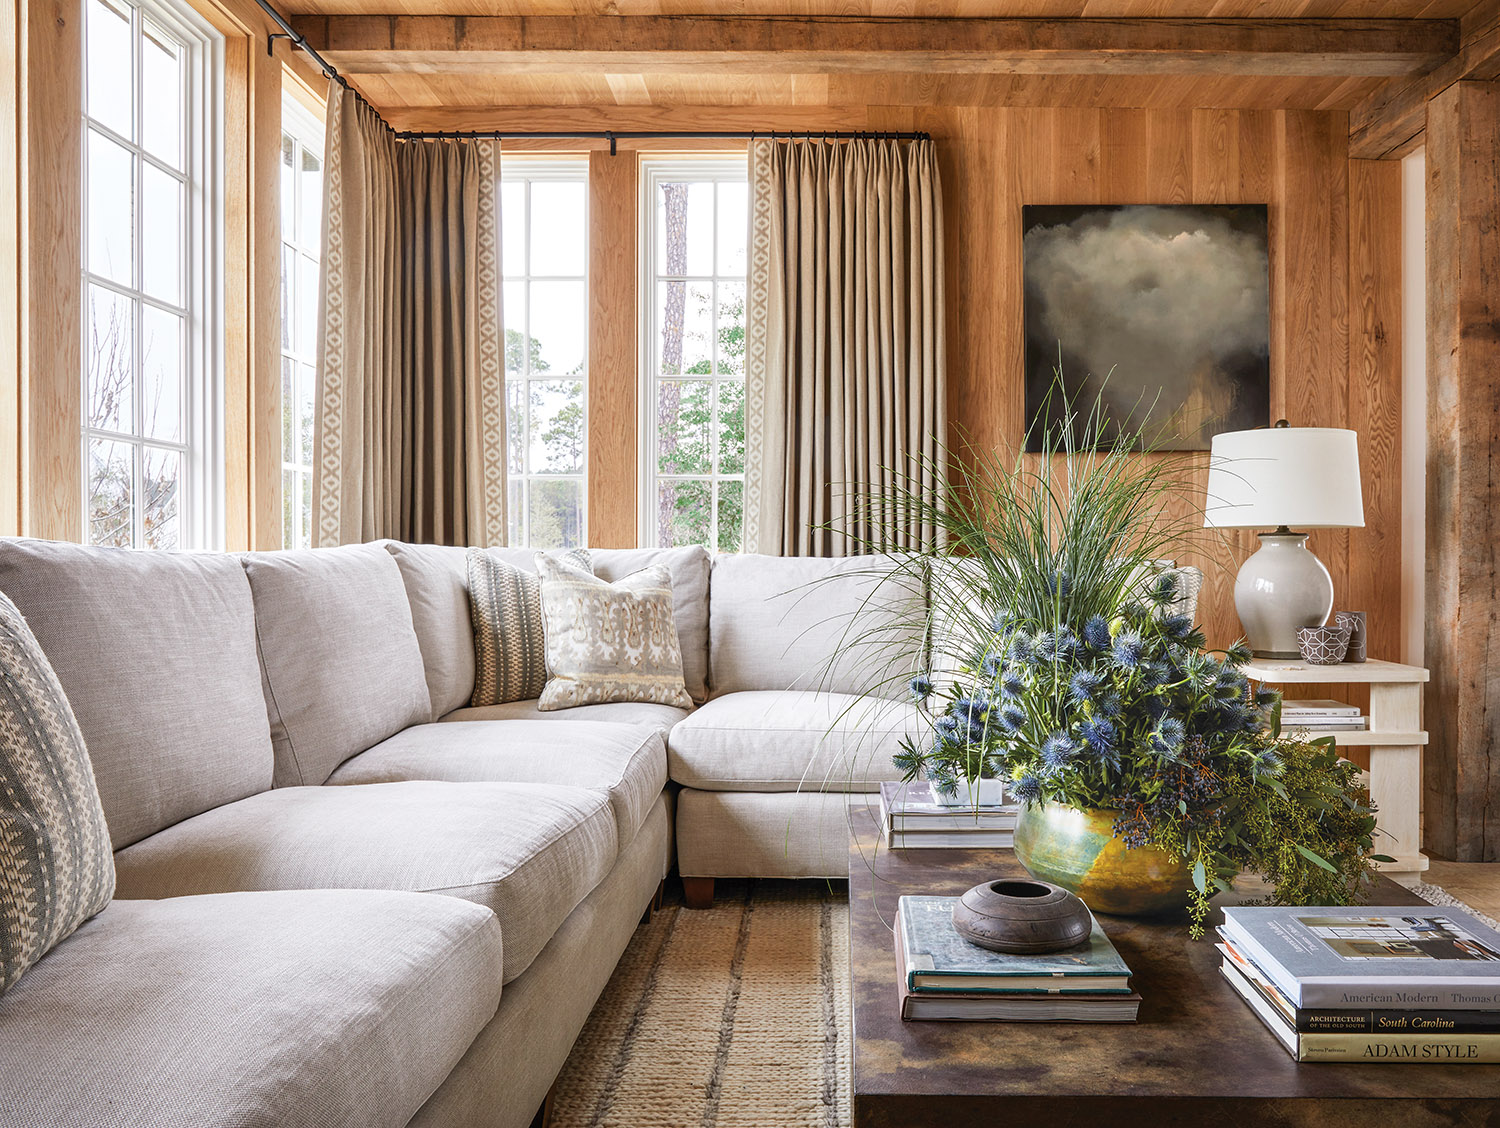 Sectional sofa with linen upholstery in wood-paneled den